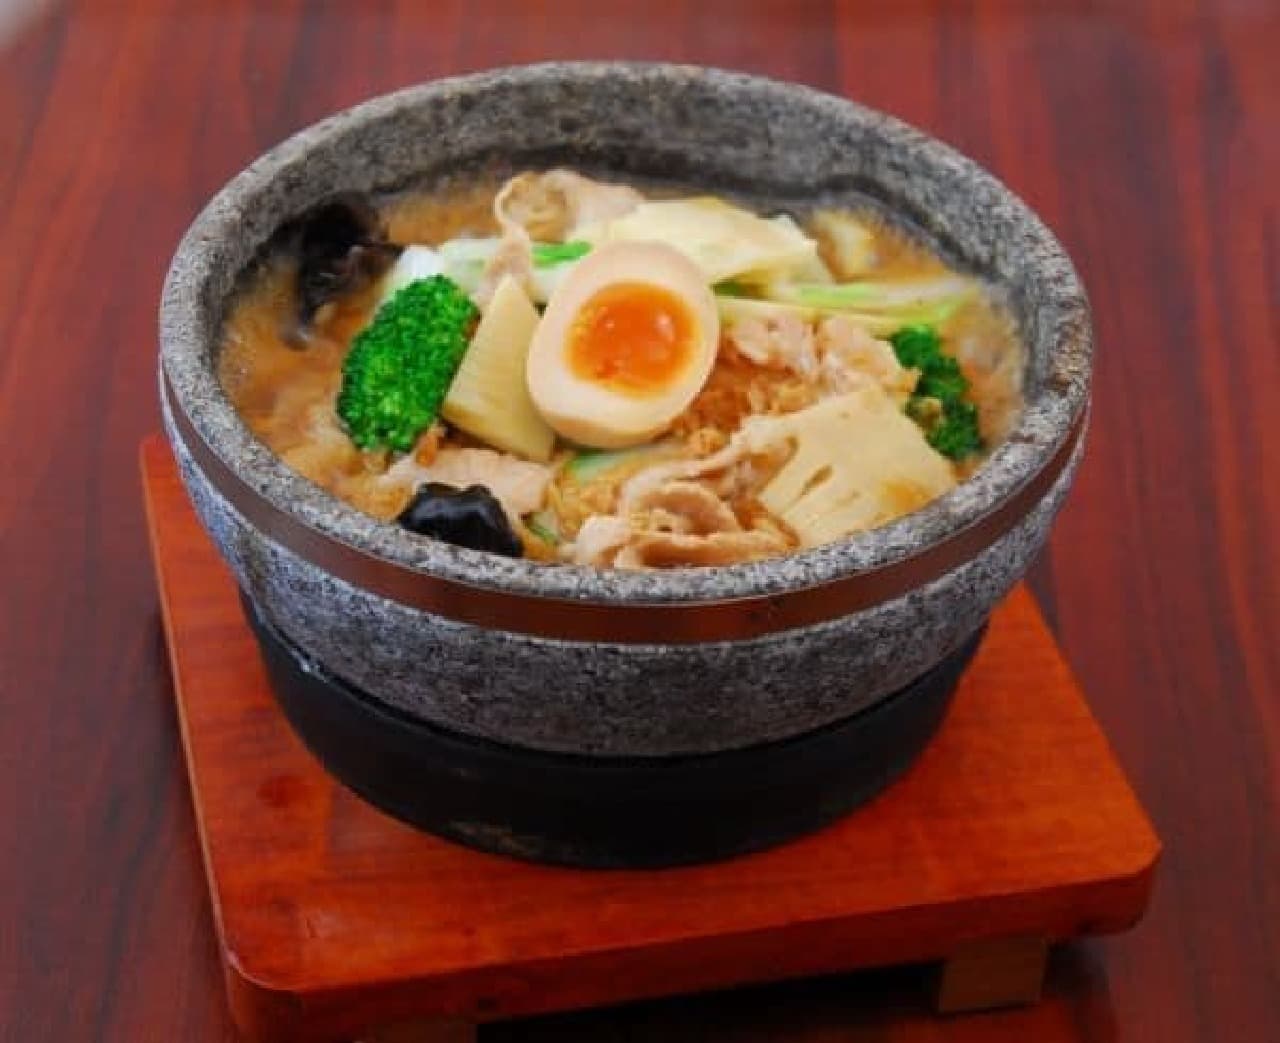 Limited to 5 meals a day! "Ishiyaki Spring Vegetable Bamboo Shoot Ramen"